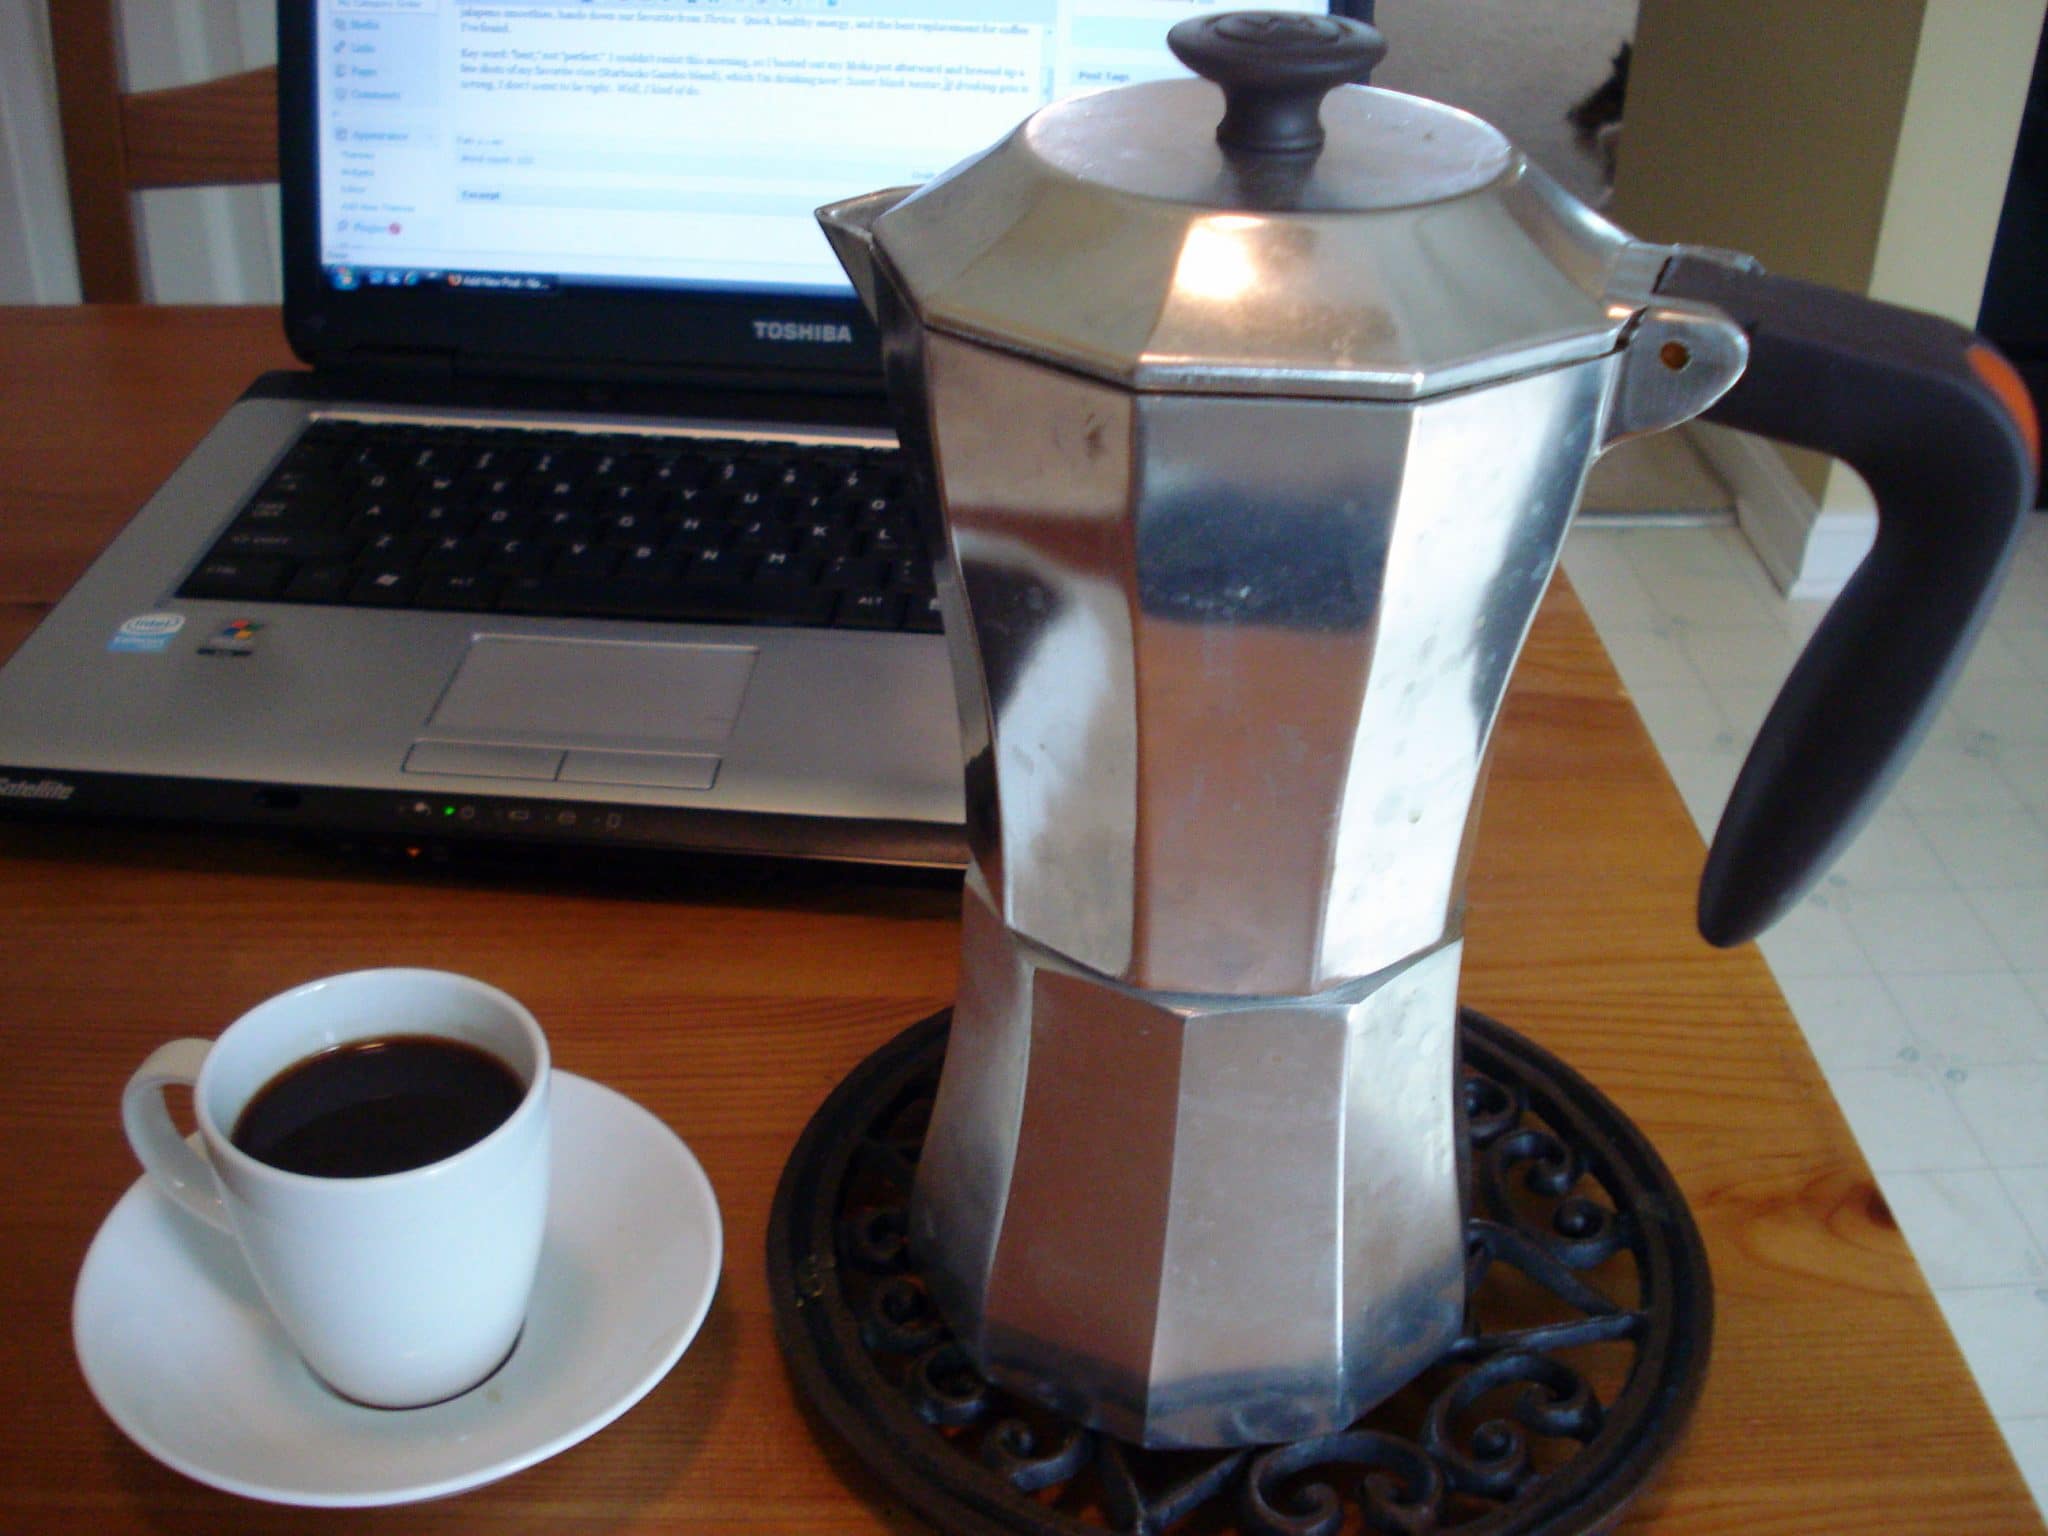 Moka pot and cup of coffee on table in front of laptop